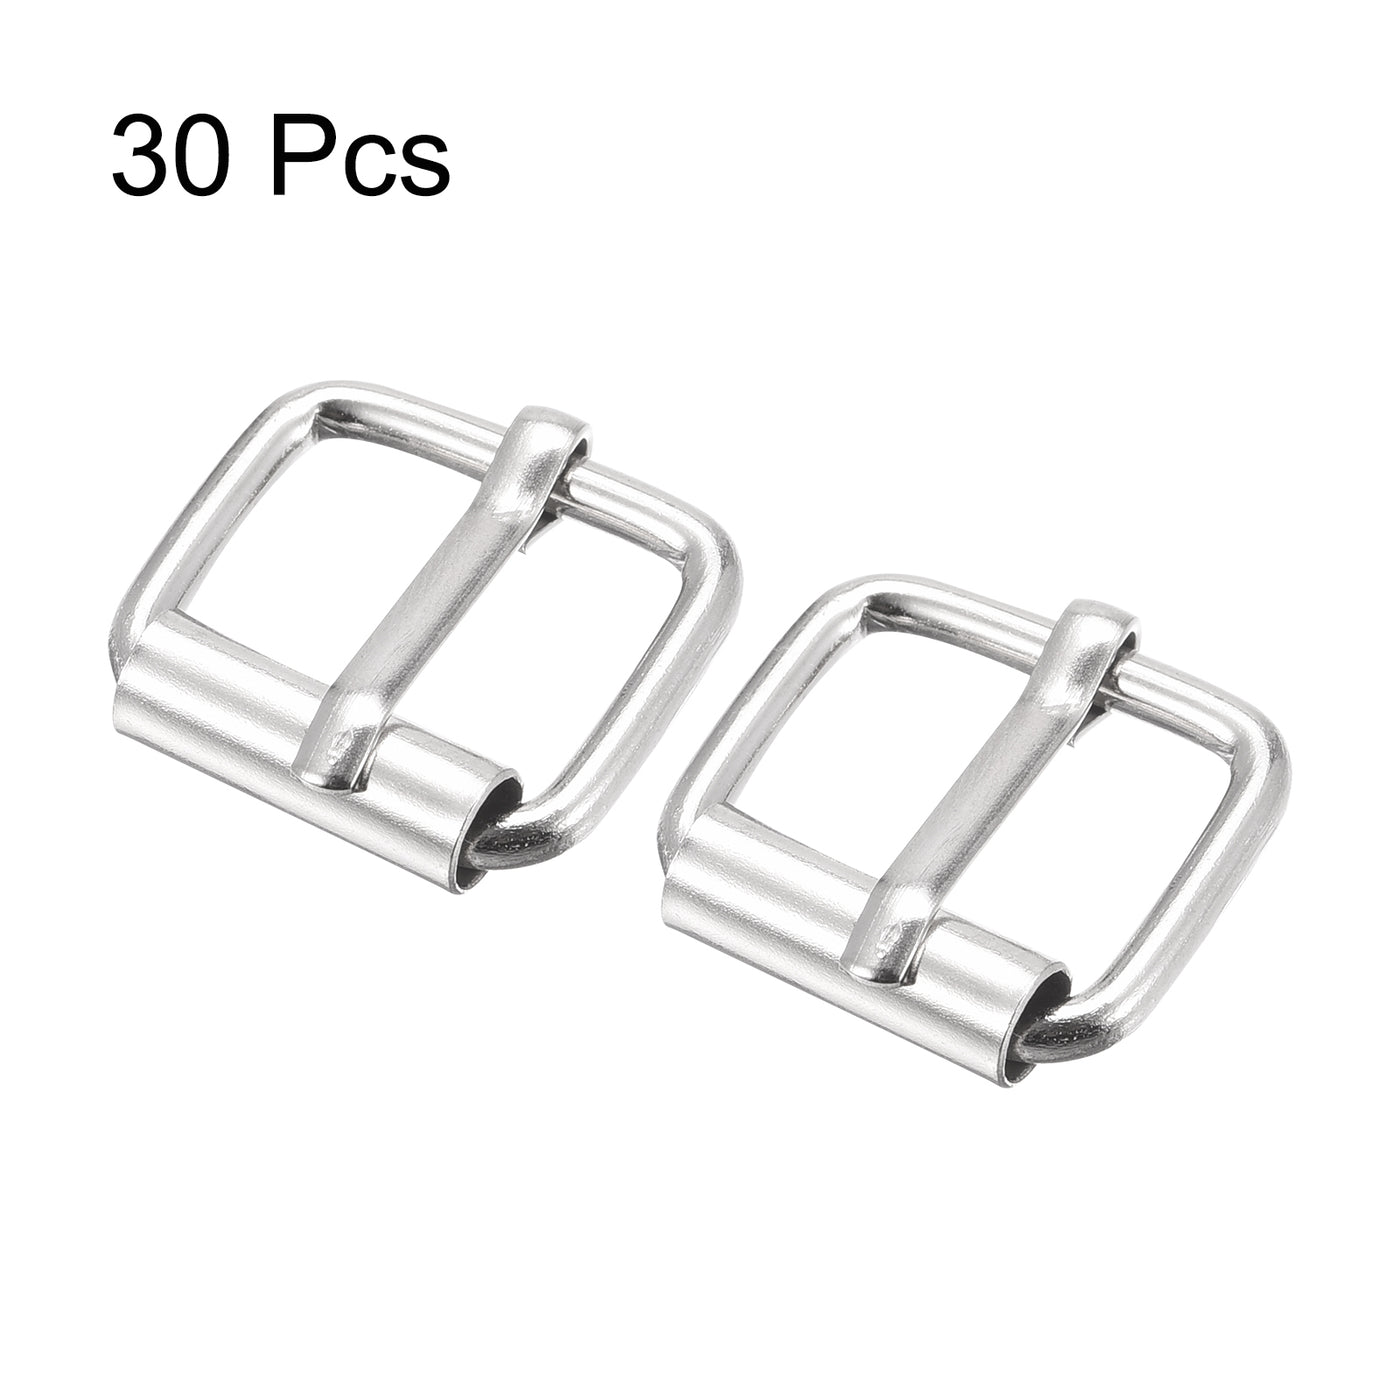 uxcell Uxcell 15mm(0.59") Metal Roller Buckles for Belts Bags Straps DIY Silver Tone 30pcs